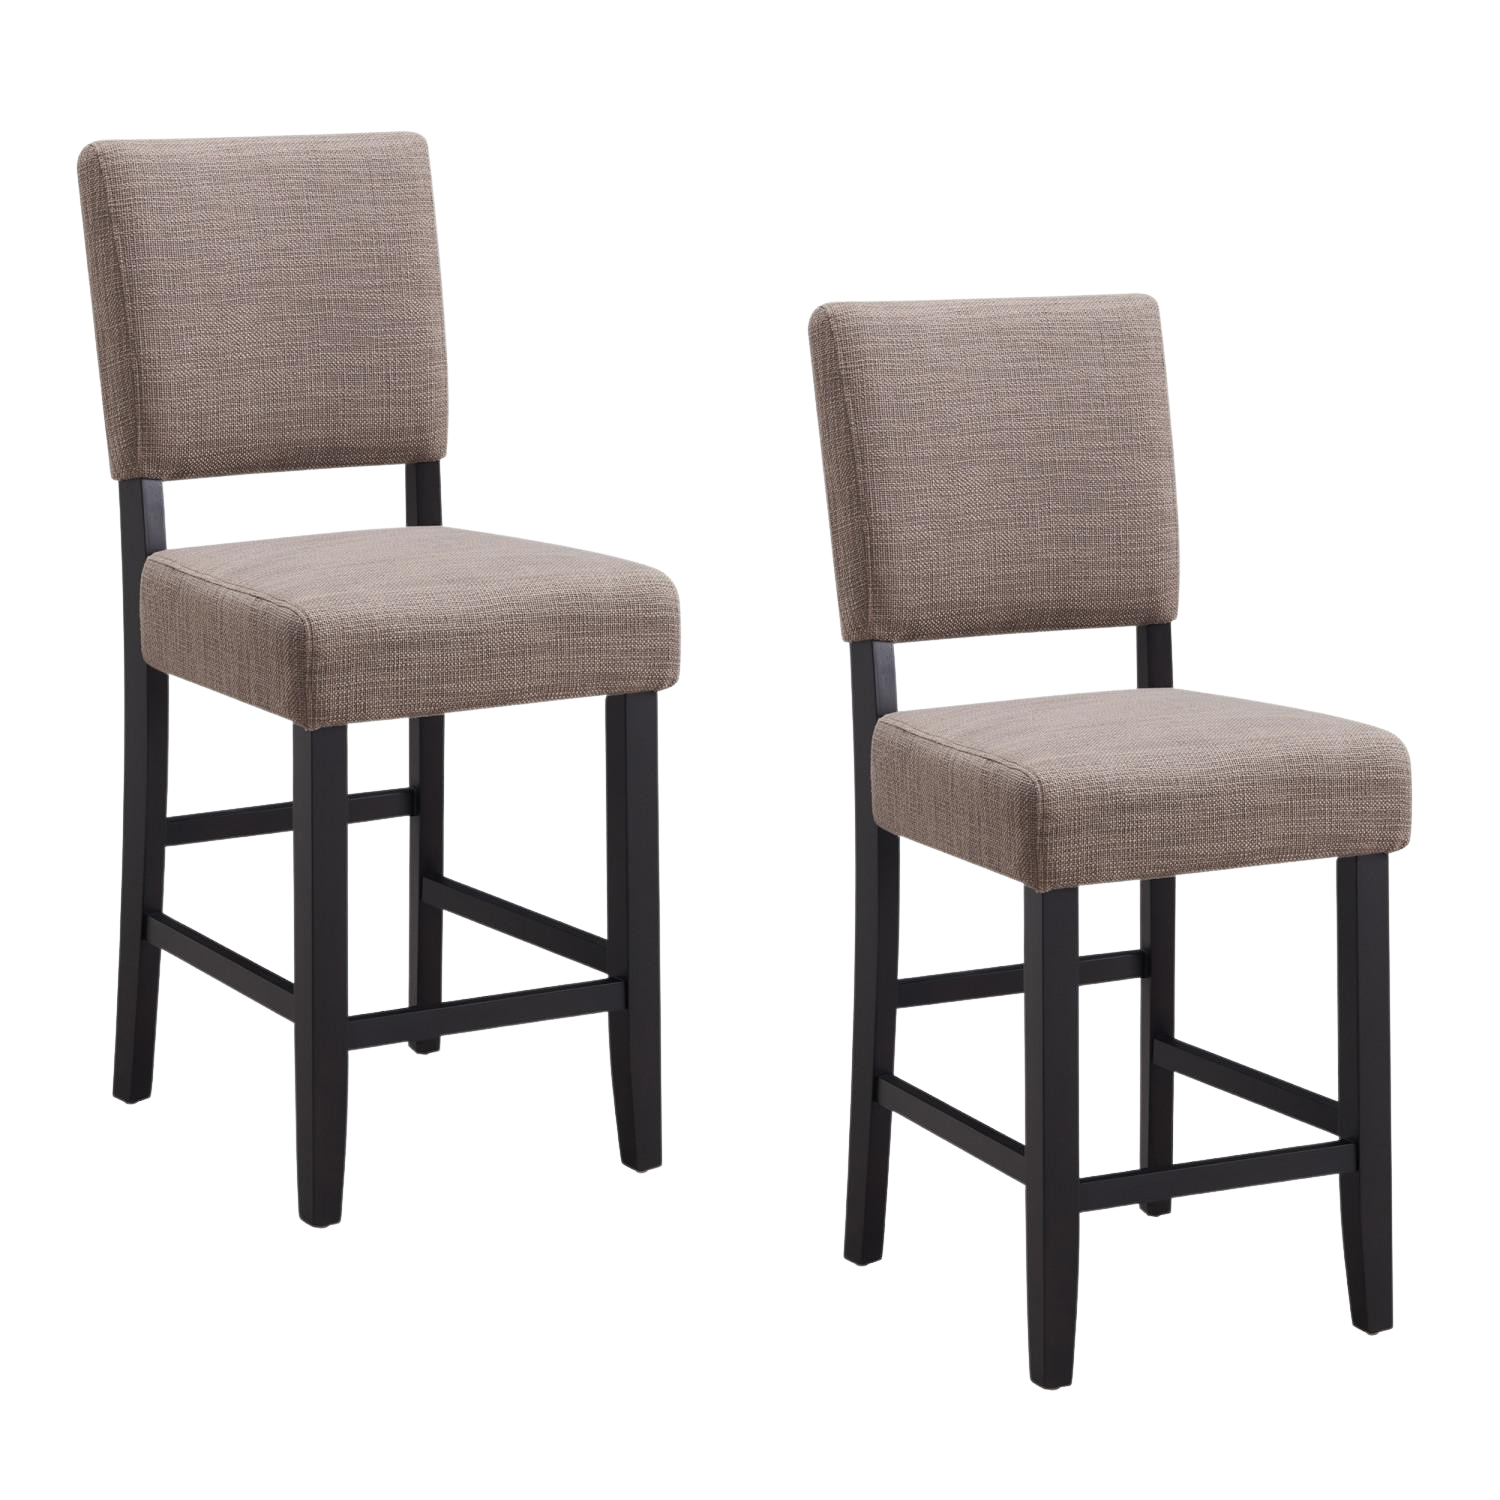 Leick Home, Leick Home 10086-BLKGL Counter Stool in Black and Gray Set of 2 New